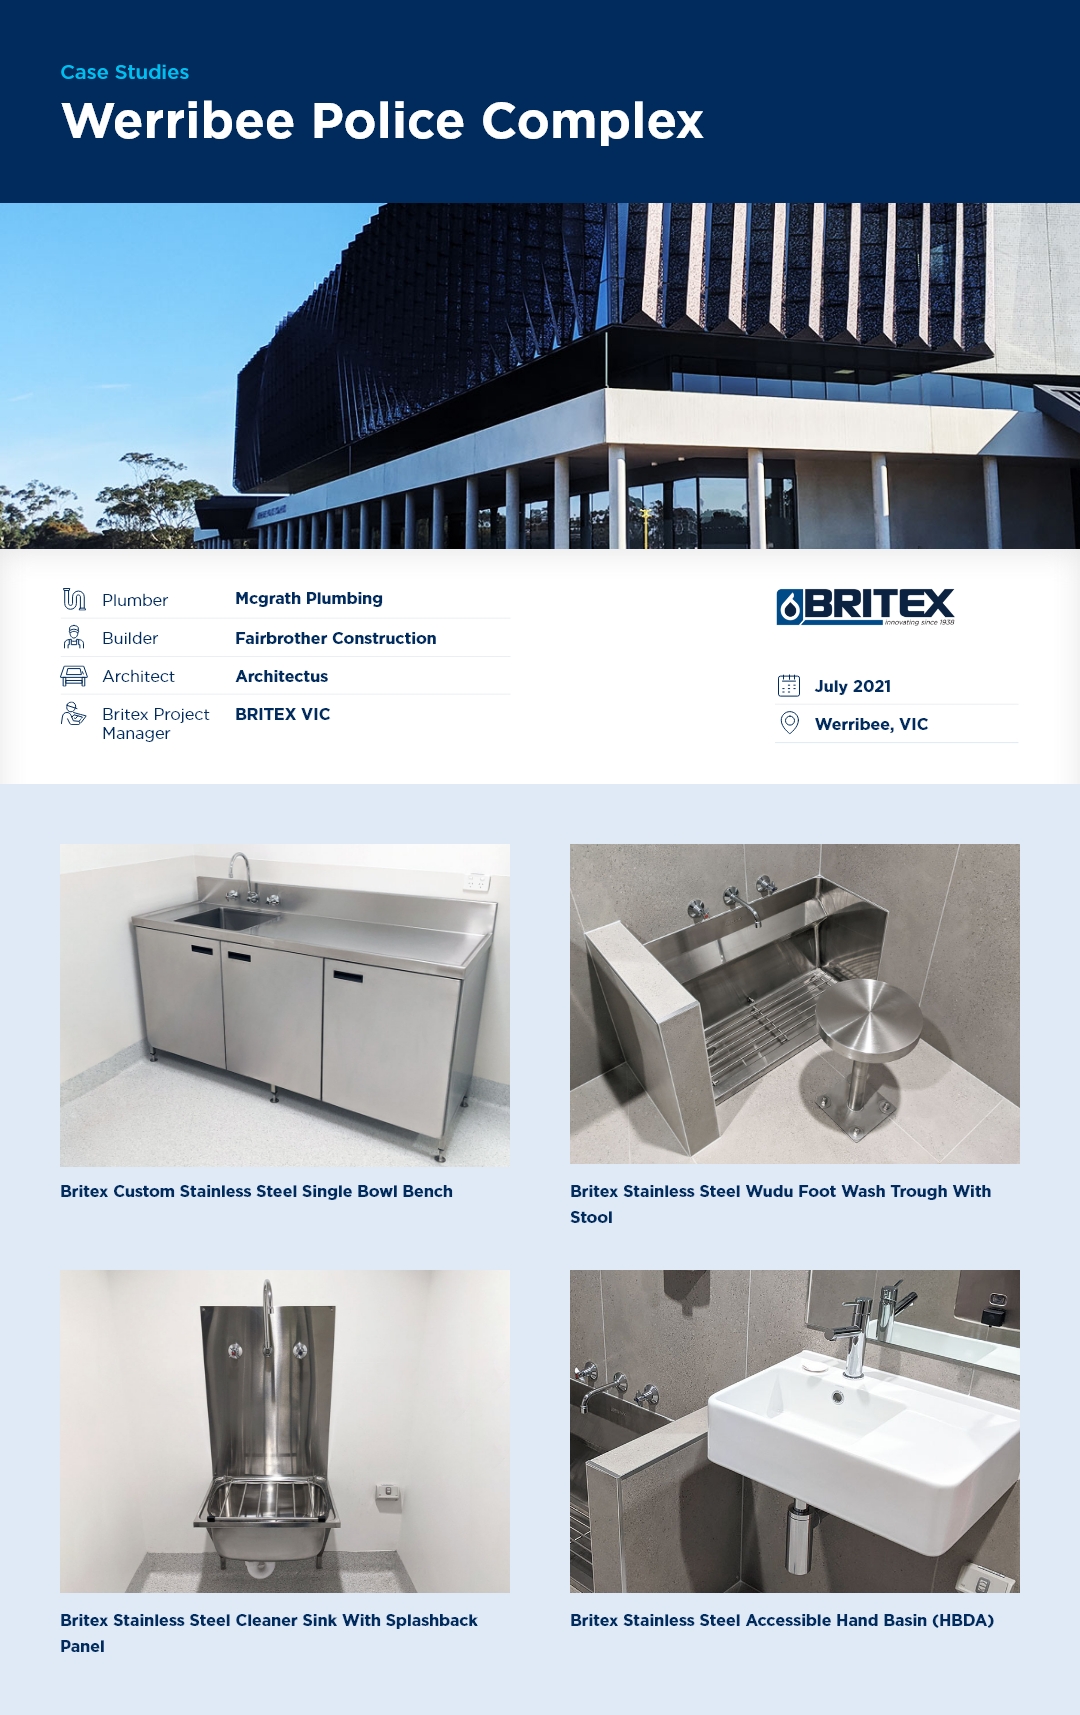 <p><a href=https://www.britex.com.au><u><strong>Britex</strong></u></a>, Australia’s premier manufacturer & supplier of stainless steel products for commercial building projects, has recently supplied its heavy-duty, vandal-resistant stainless steel products for usage in the new <strong>Werribee Police Station</strong> and its holding cells.</p>